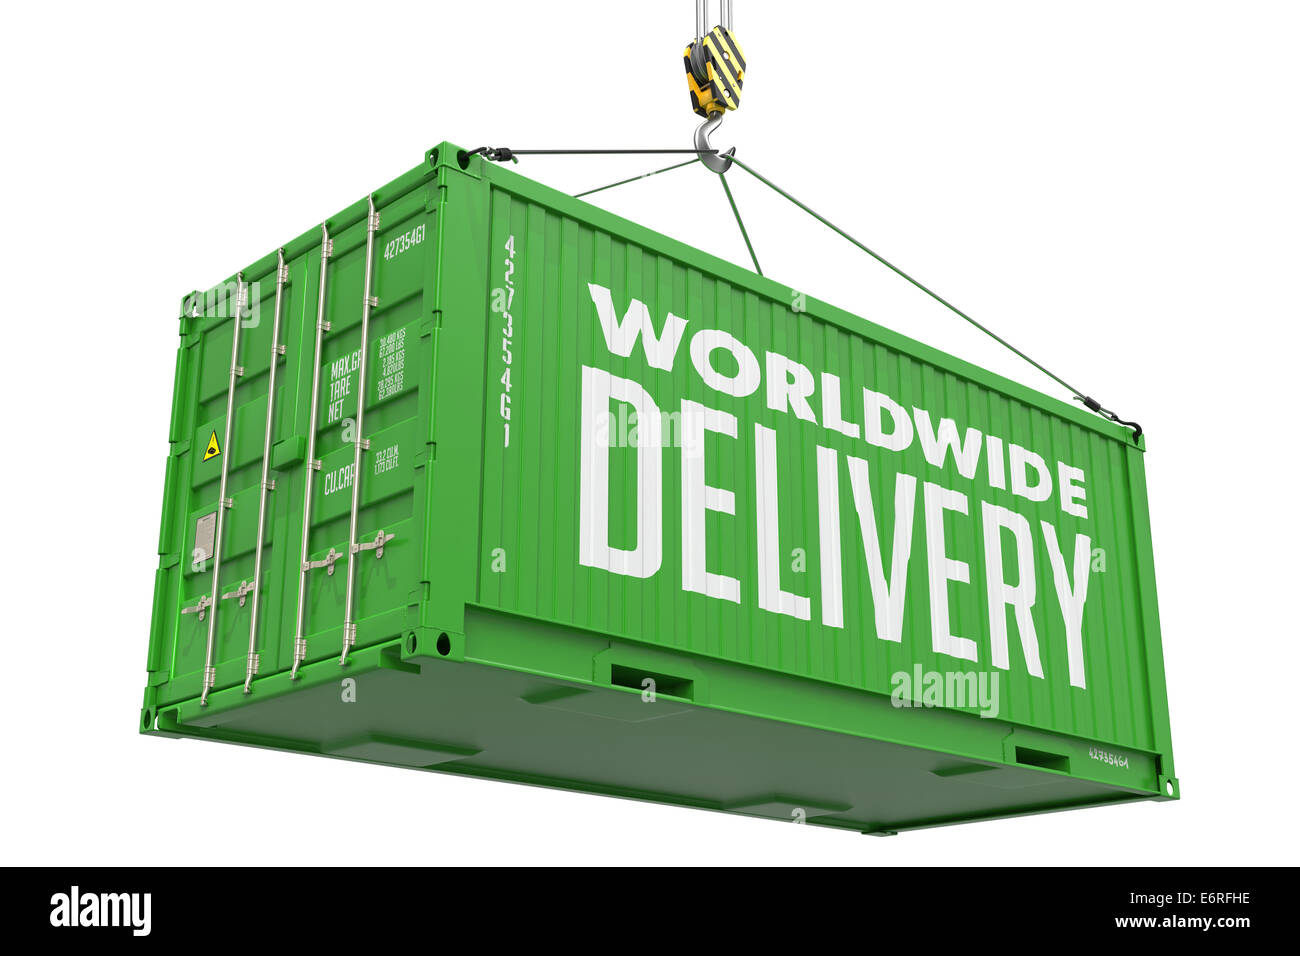 World Wide Delivery - Green Container. Stock Photo